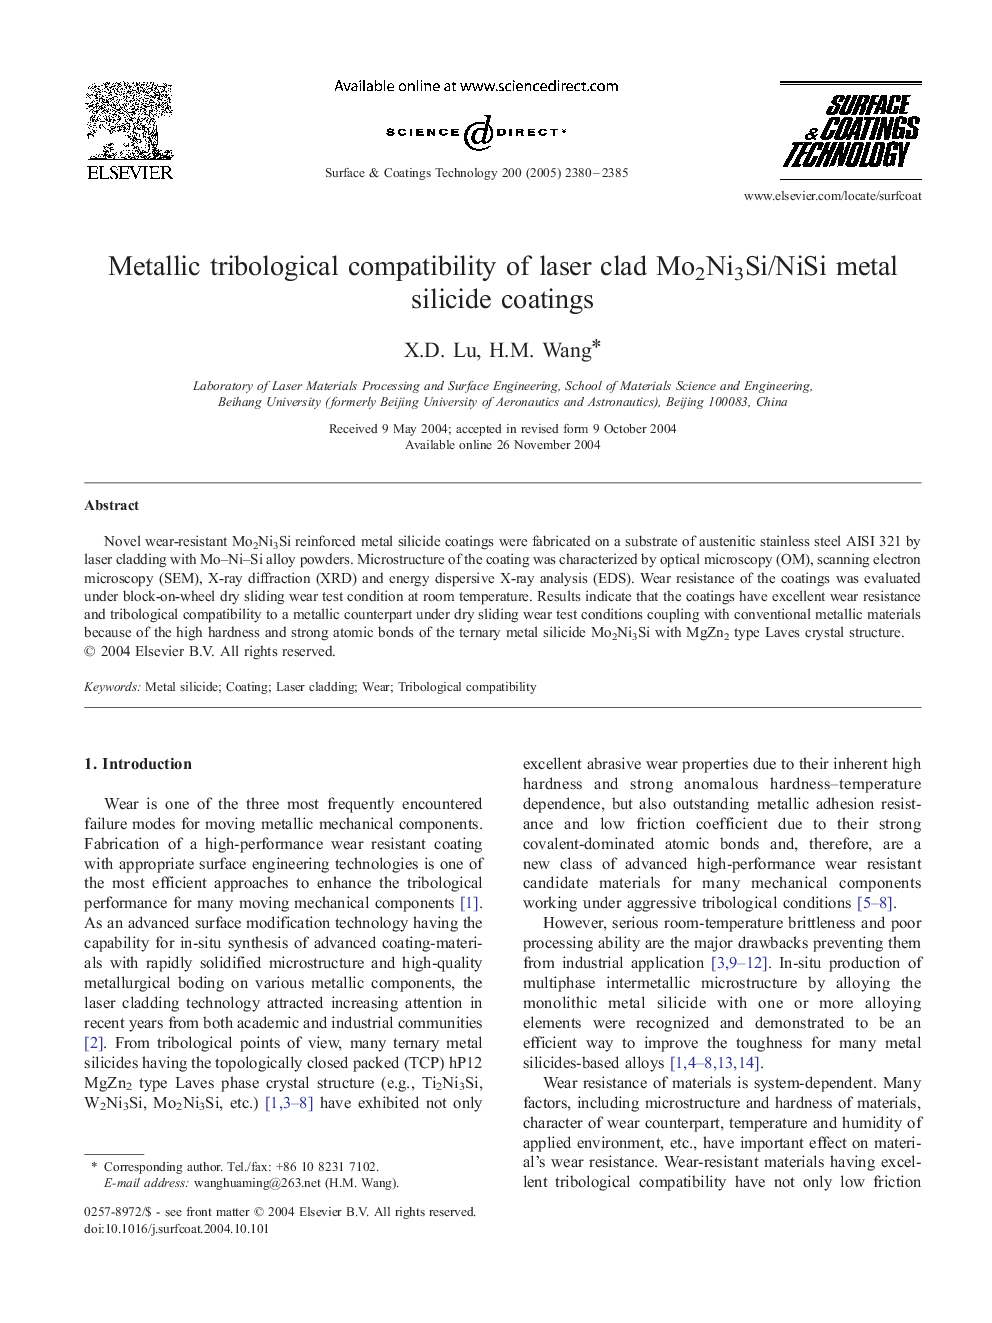 Metallic tribological compatibility of laser clad Mo2Ni3Si/NiSi metal silicide coatings